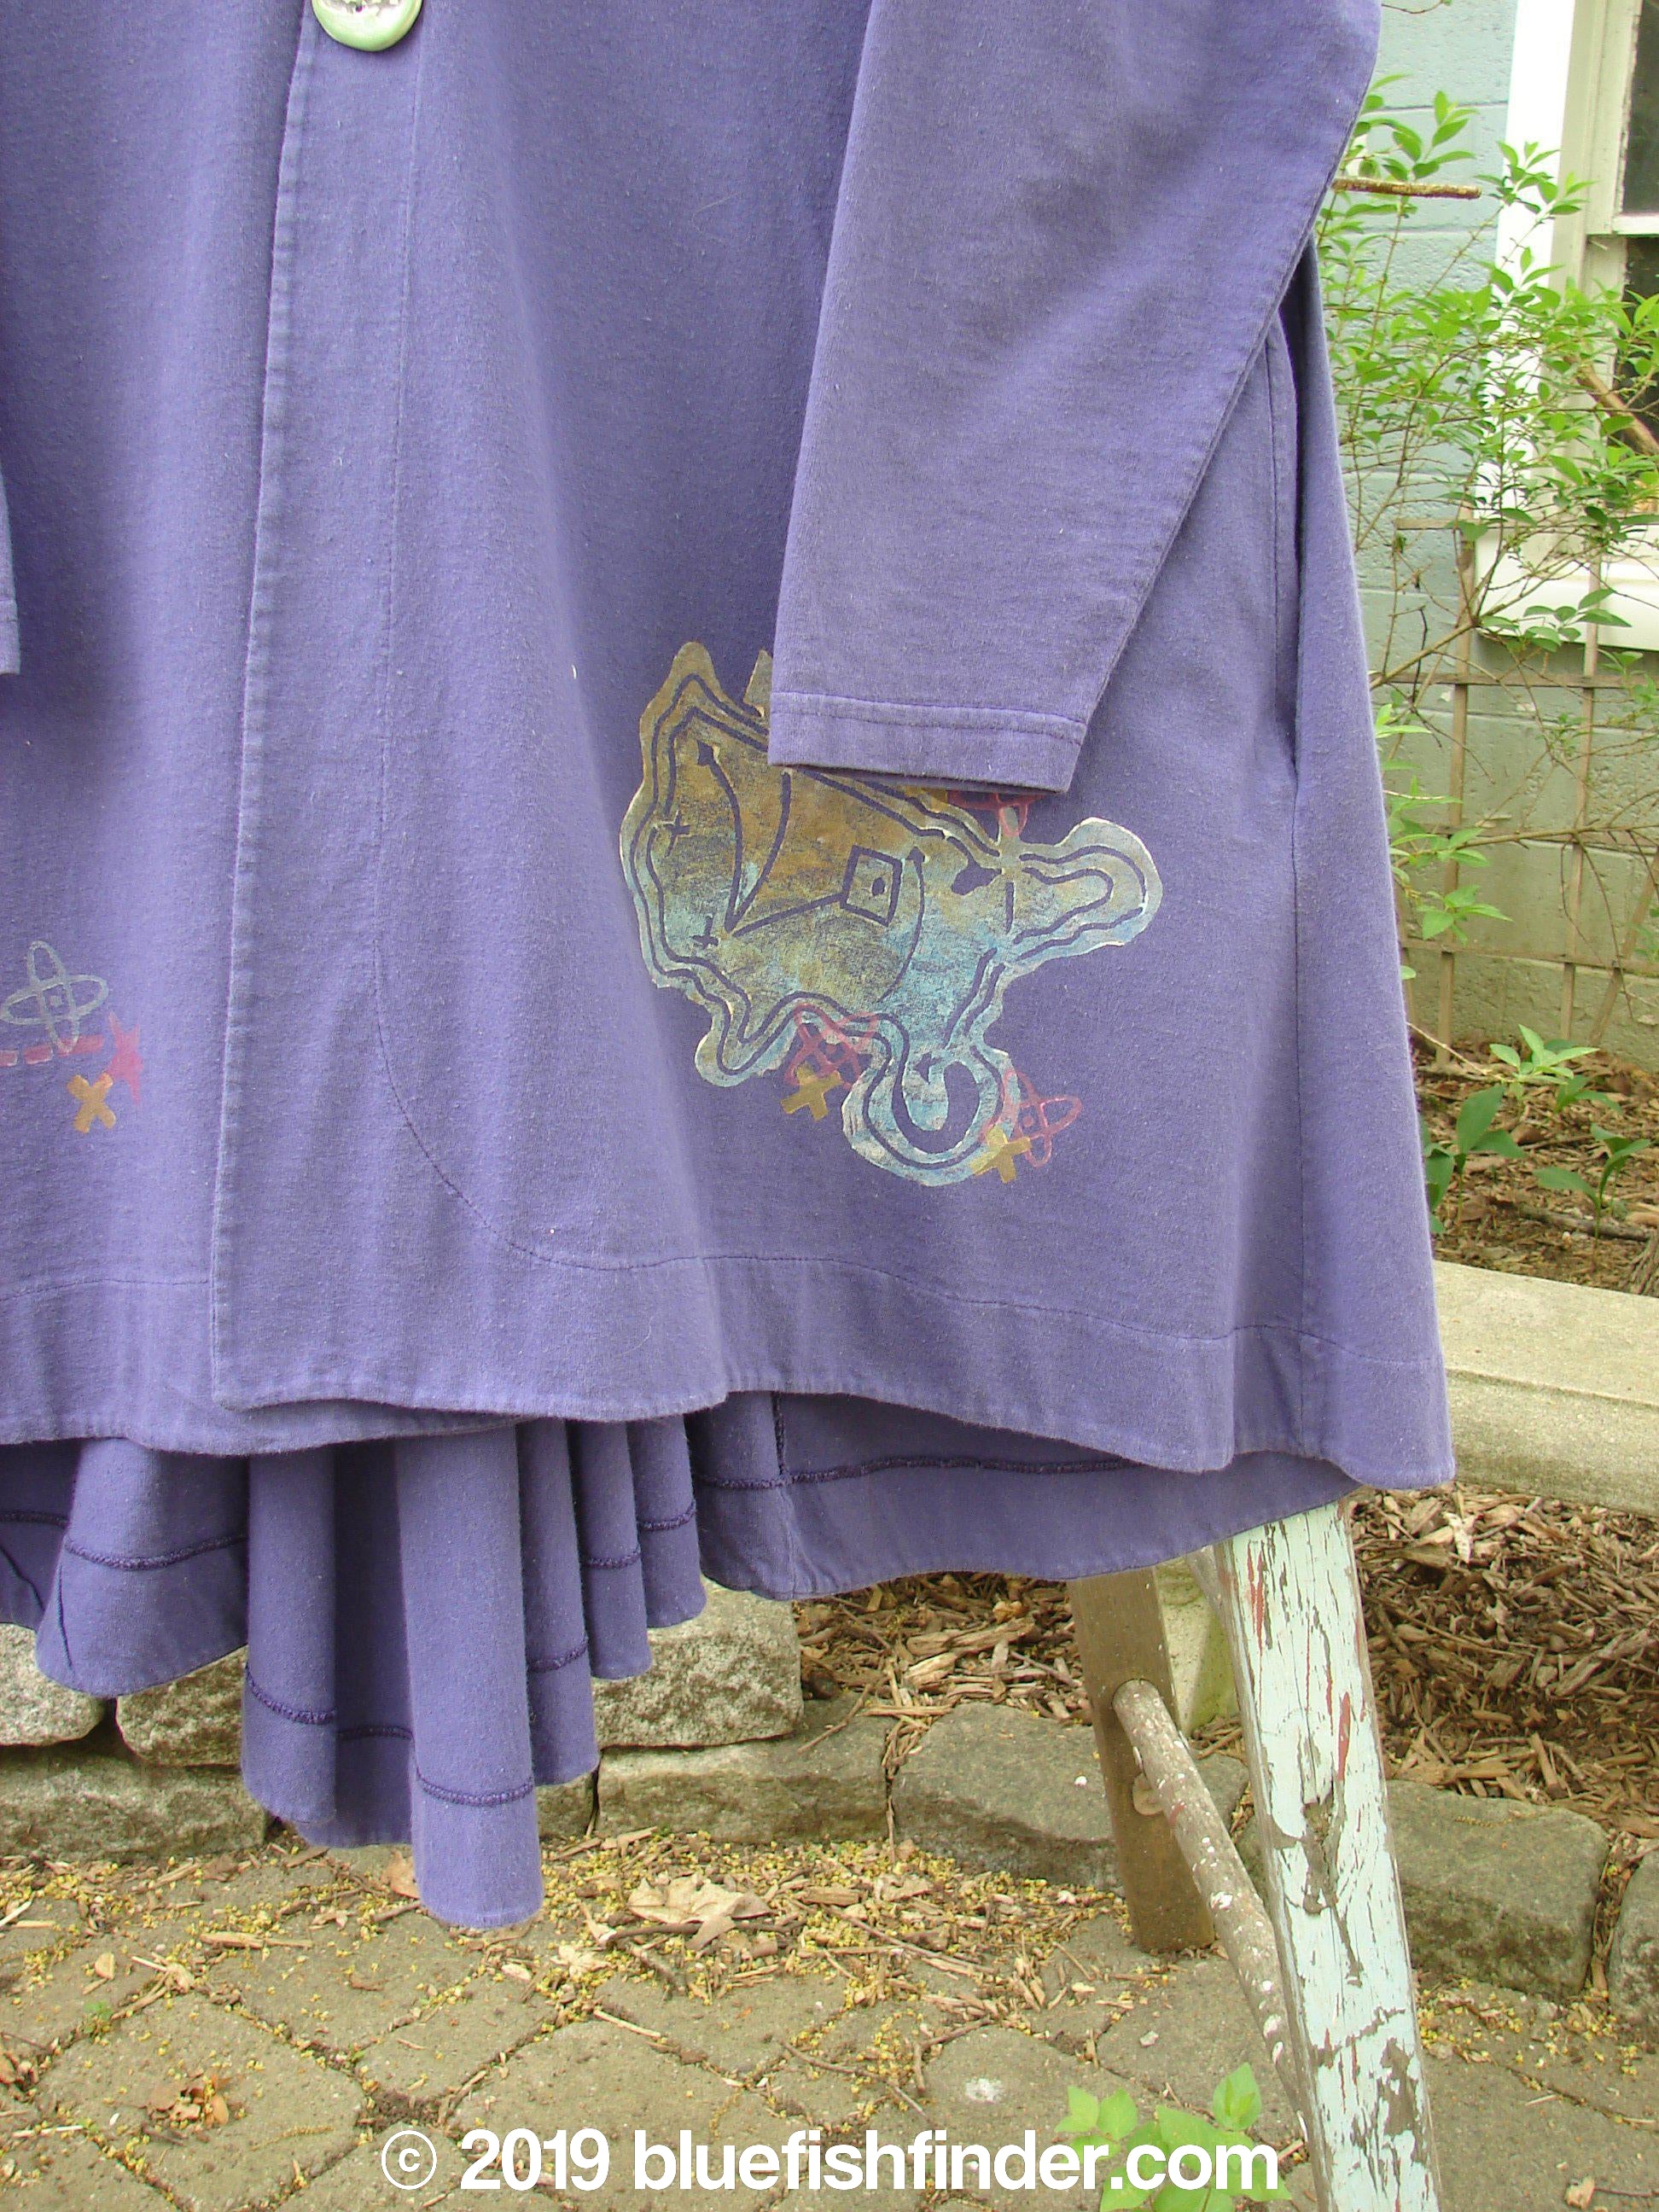 1996 Dining Car Jacket Travel Niagara Size 1: A purple robe-like jacket made from organic cotton. Features include a V-shaped neckline, artisan porcelain buttons, and a travel-themed paint design.